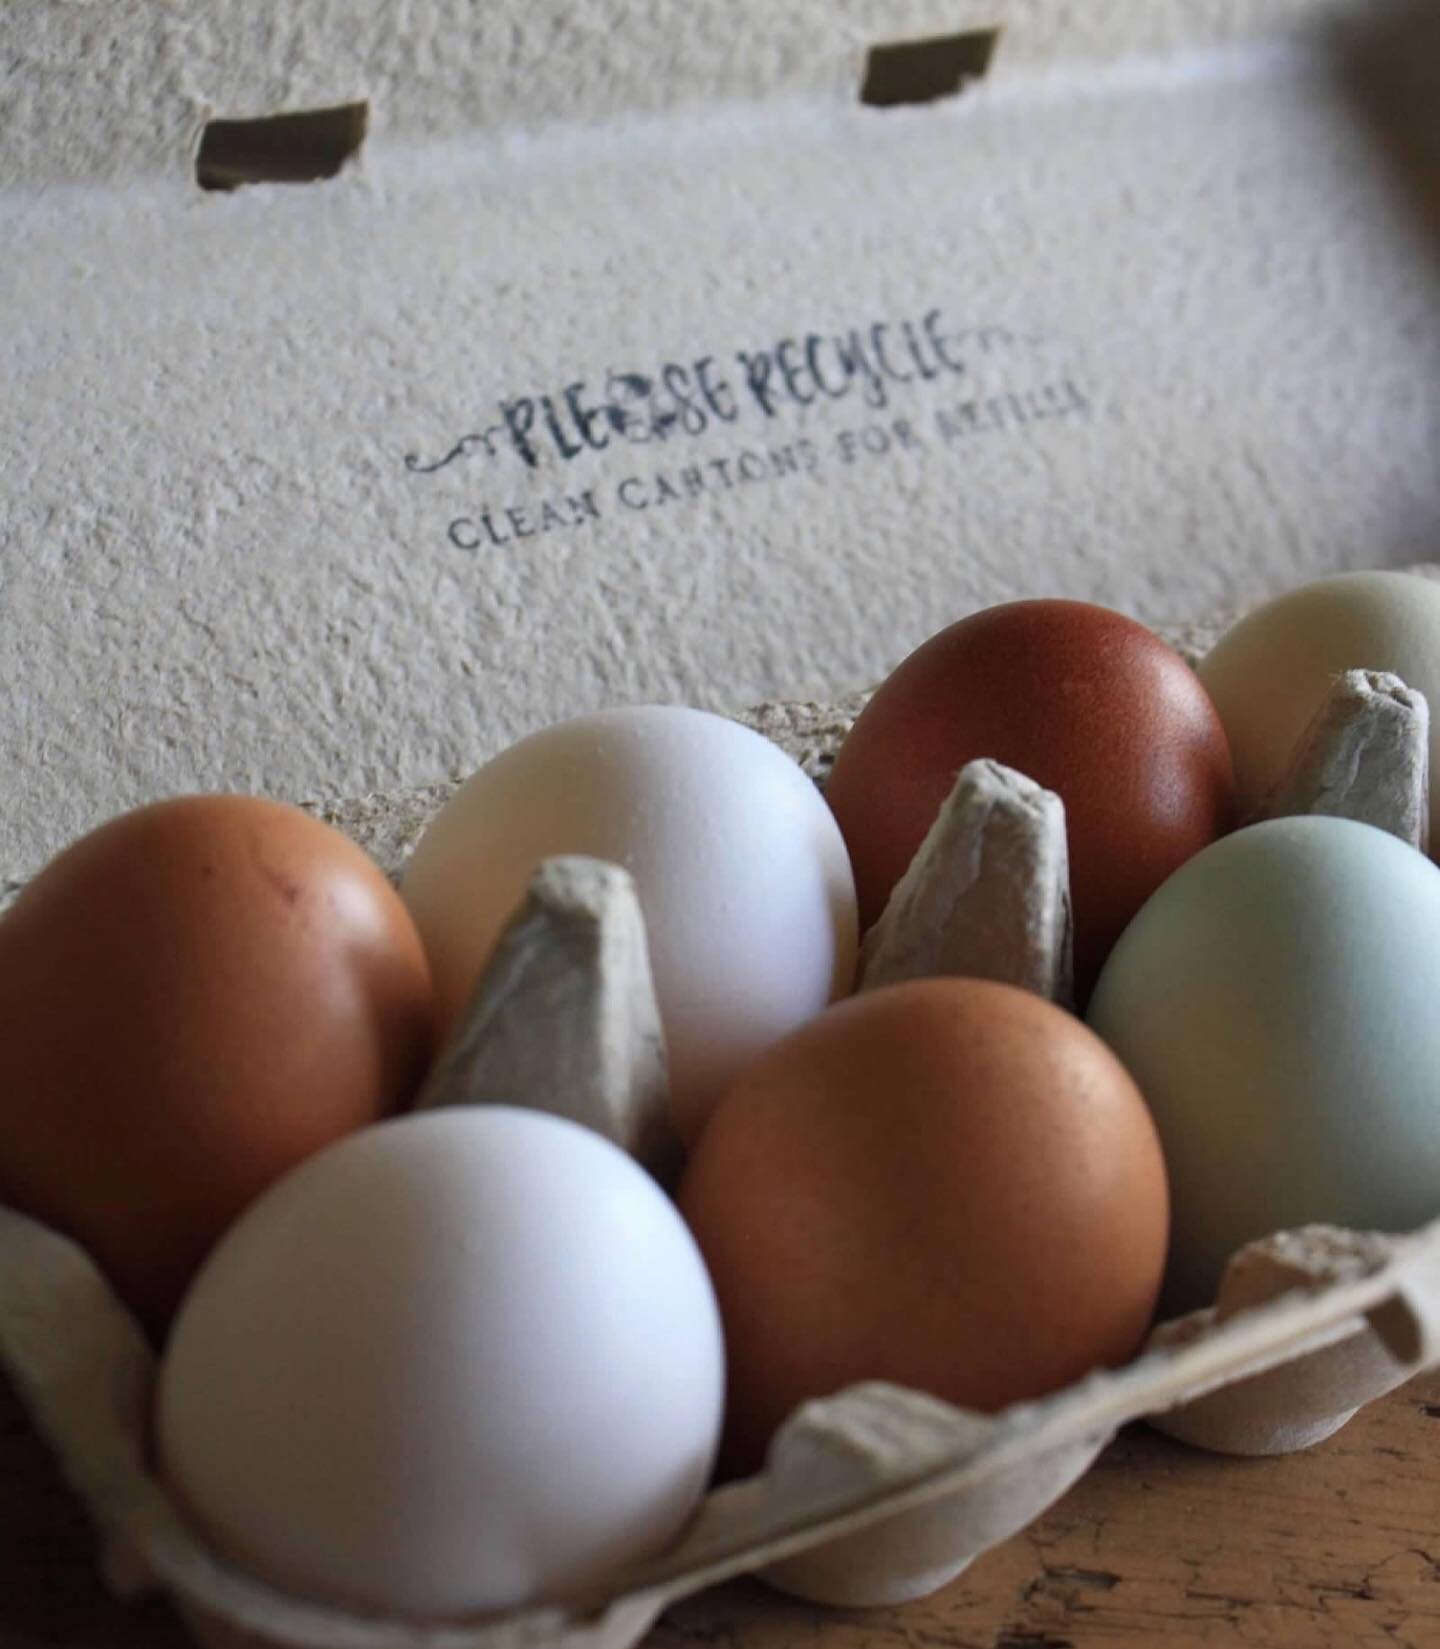 We have a LOT of eggs! Chicken, duck, goose and quail eggs will be available both for farm pick up this week and at the @wheatlandspring farmers market on Saturday from 11-1!

So excited to see all our favorite farms:
🥬 @farmfireside 
🌸 @far_bungal